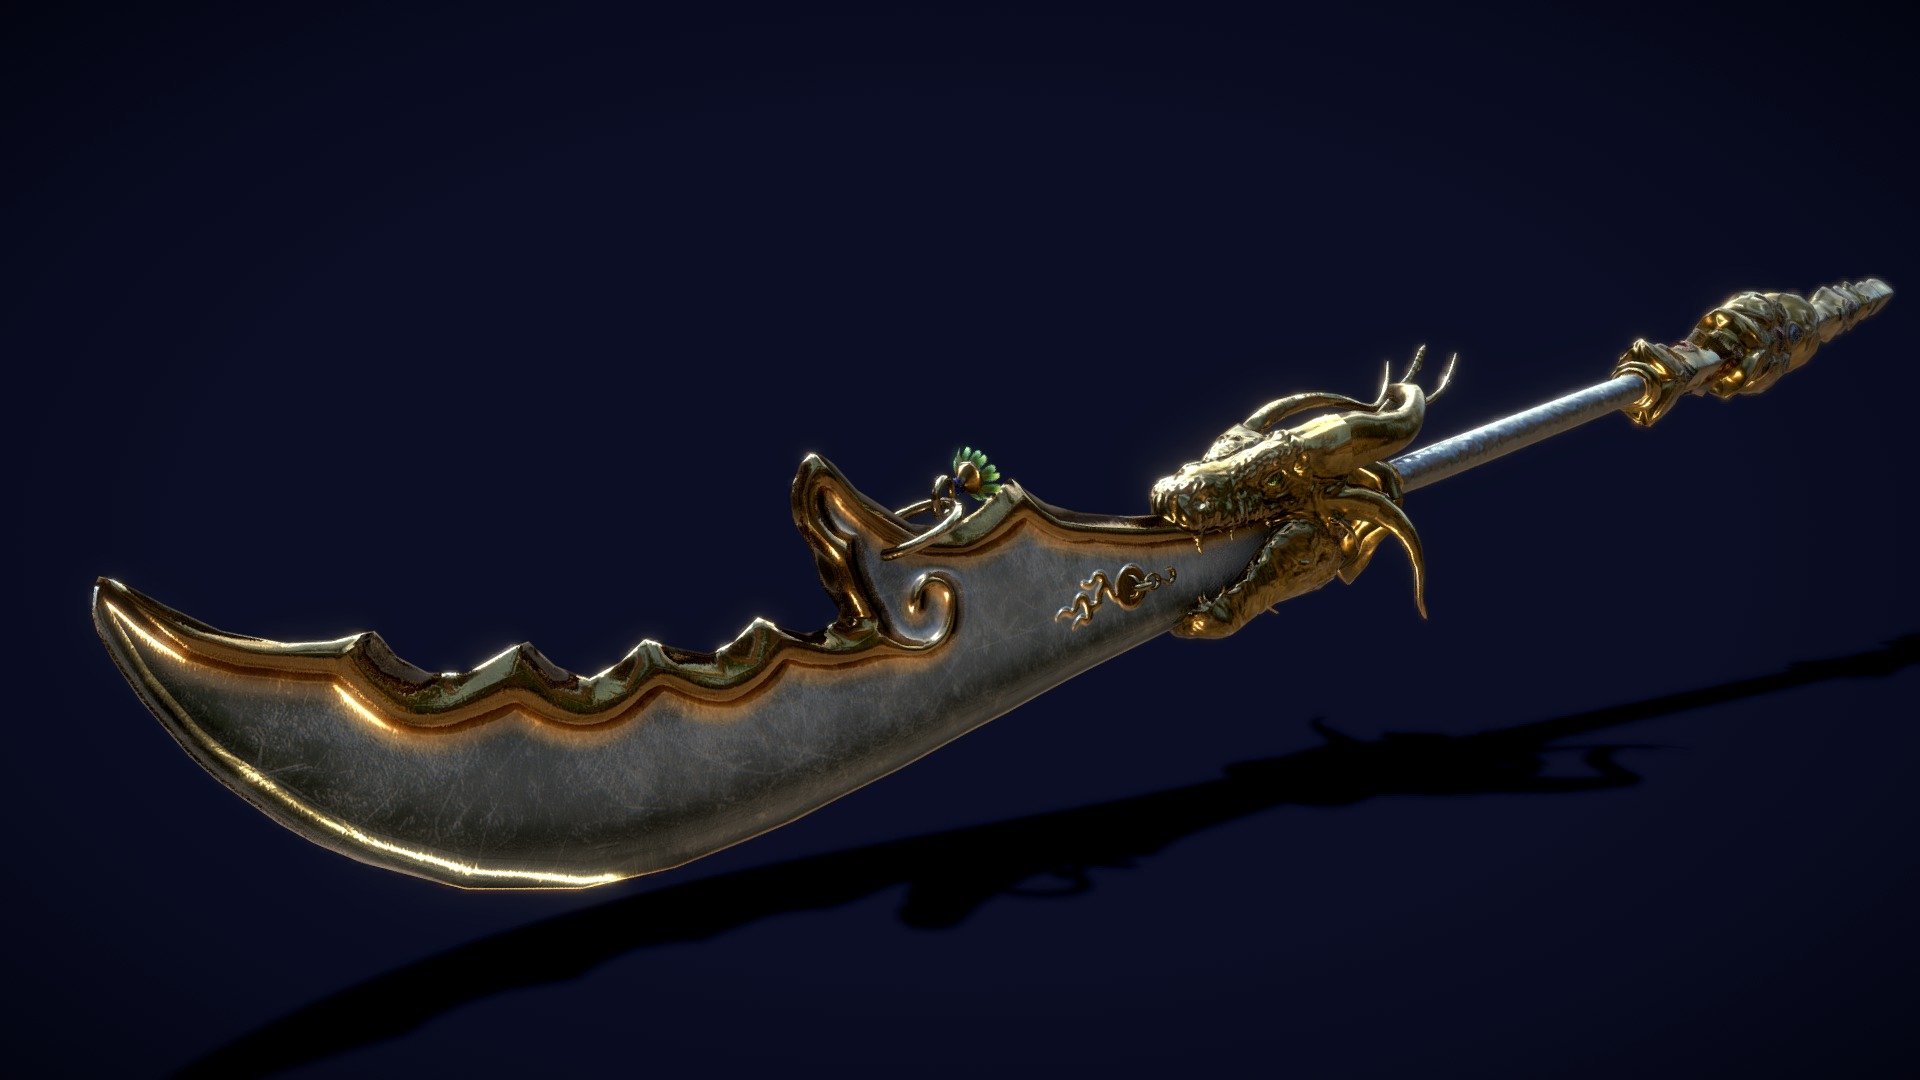 This is inspired by Guan Yu's guandao that can be seen below in the image. I put my own spin on it using the head of a dragon I made recently (I uploaded that here too!) 

 - Guandao Staff Weapon - 3D model by Heather_3D 3d model